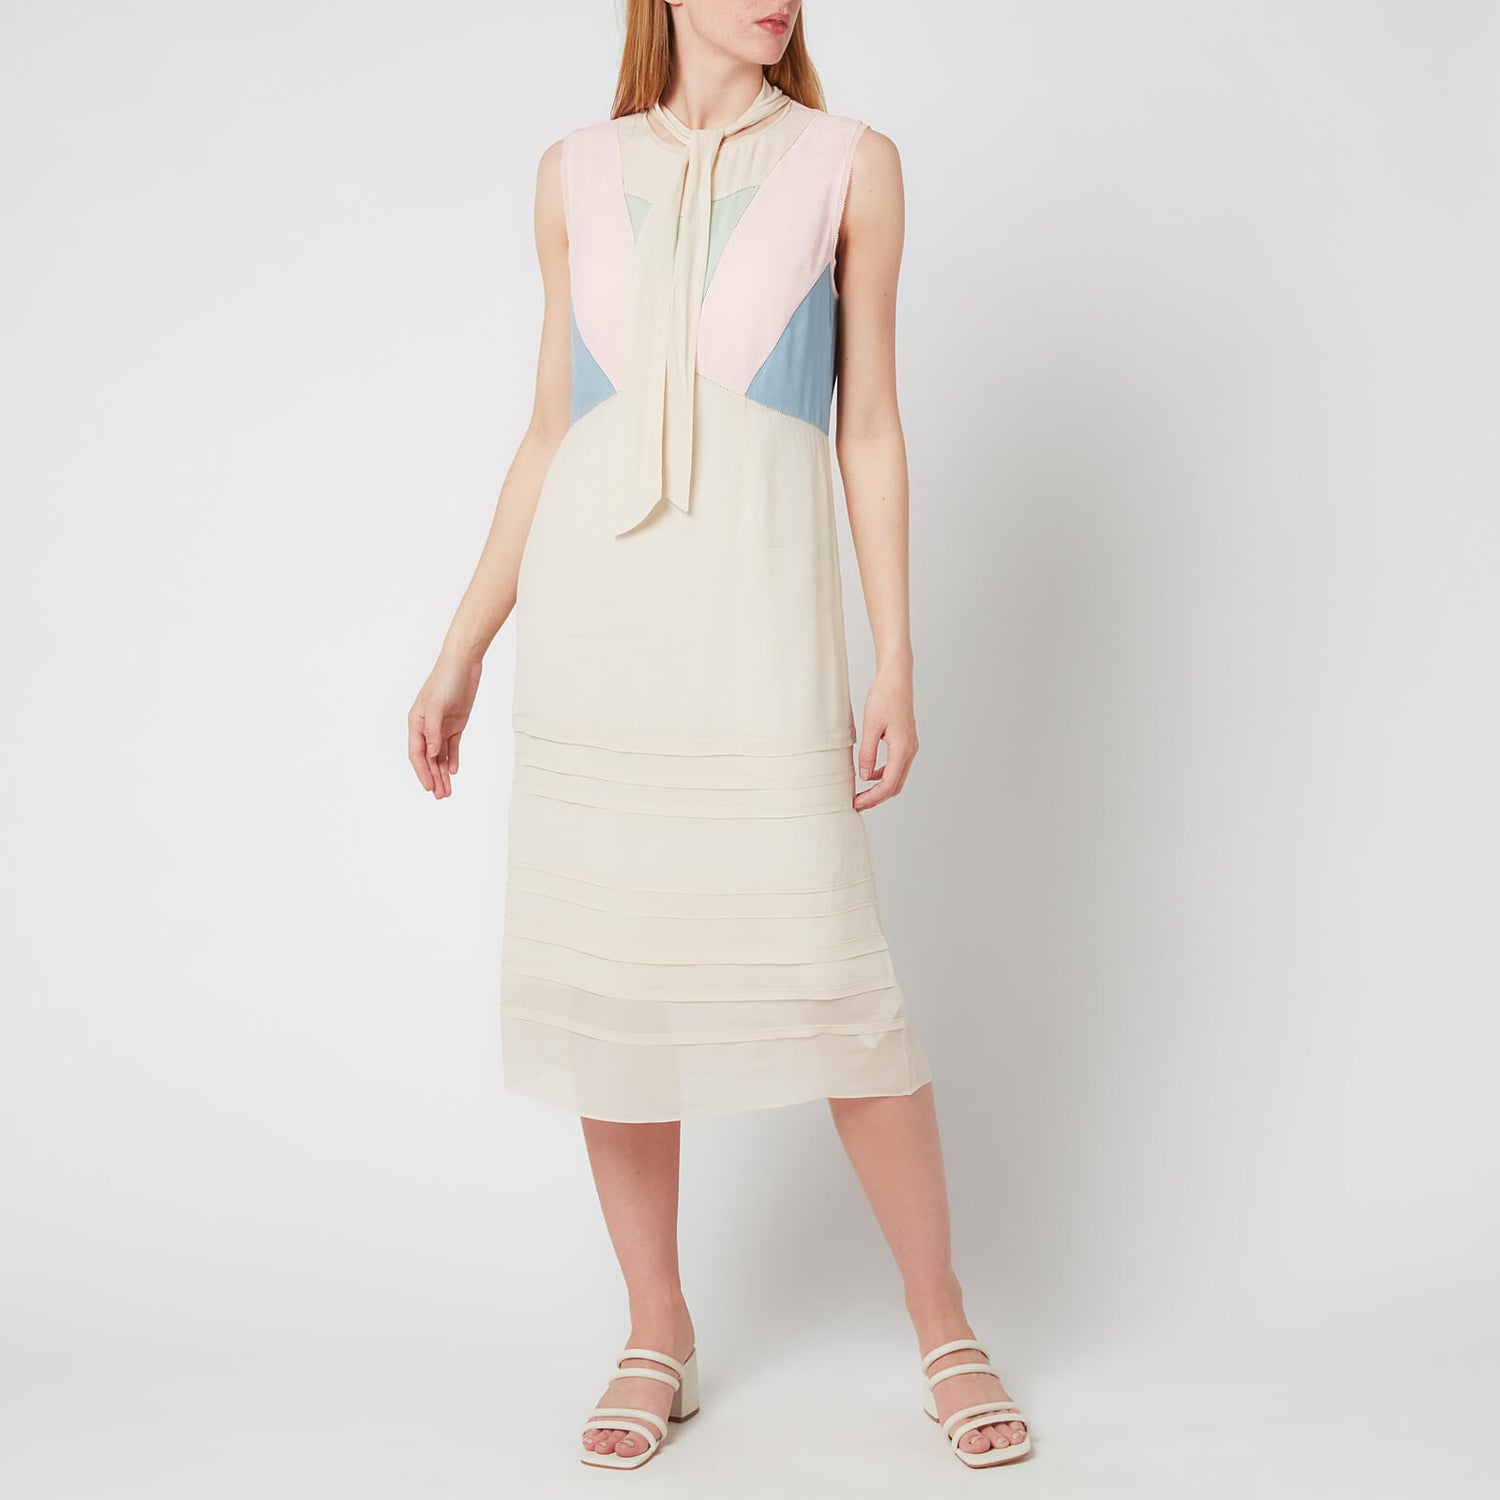 Coach Women's Paint By Numbers Dress - Pale Yellow - US 4/UK 8